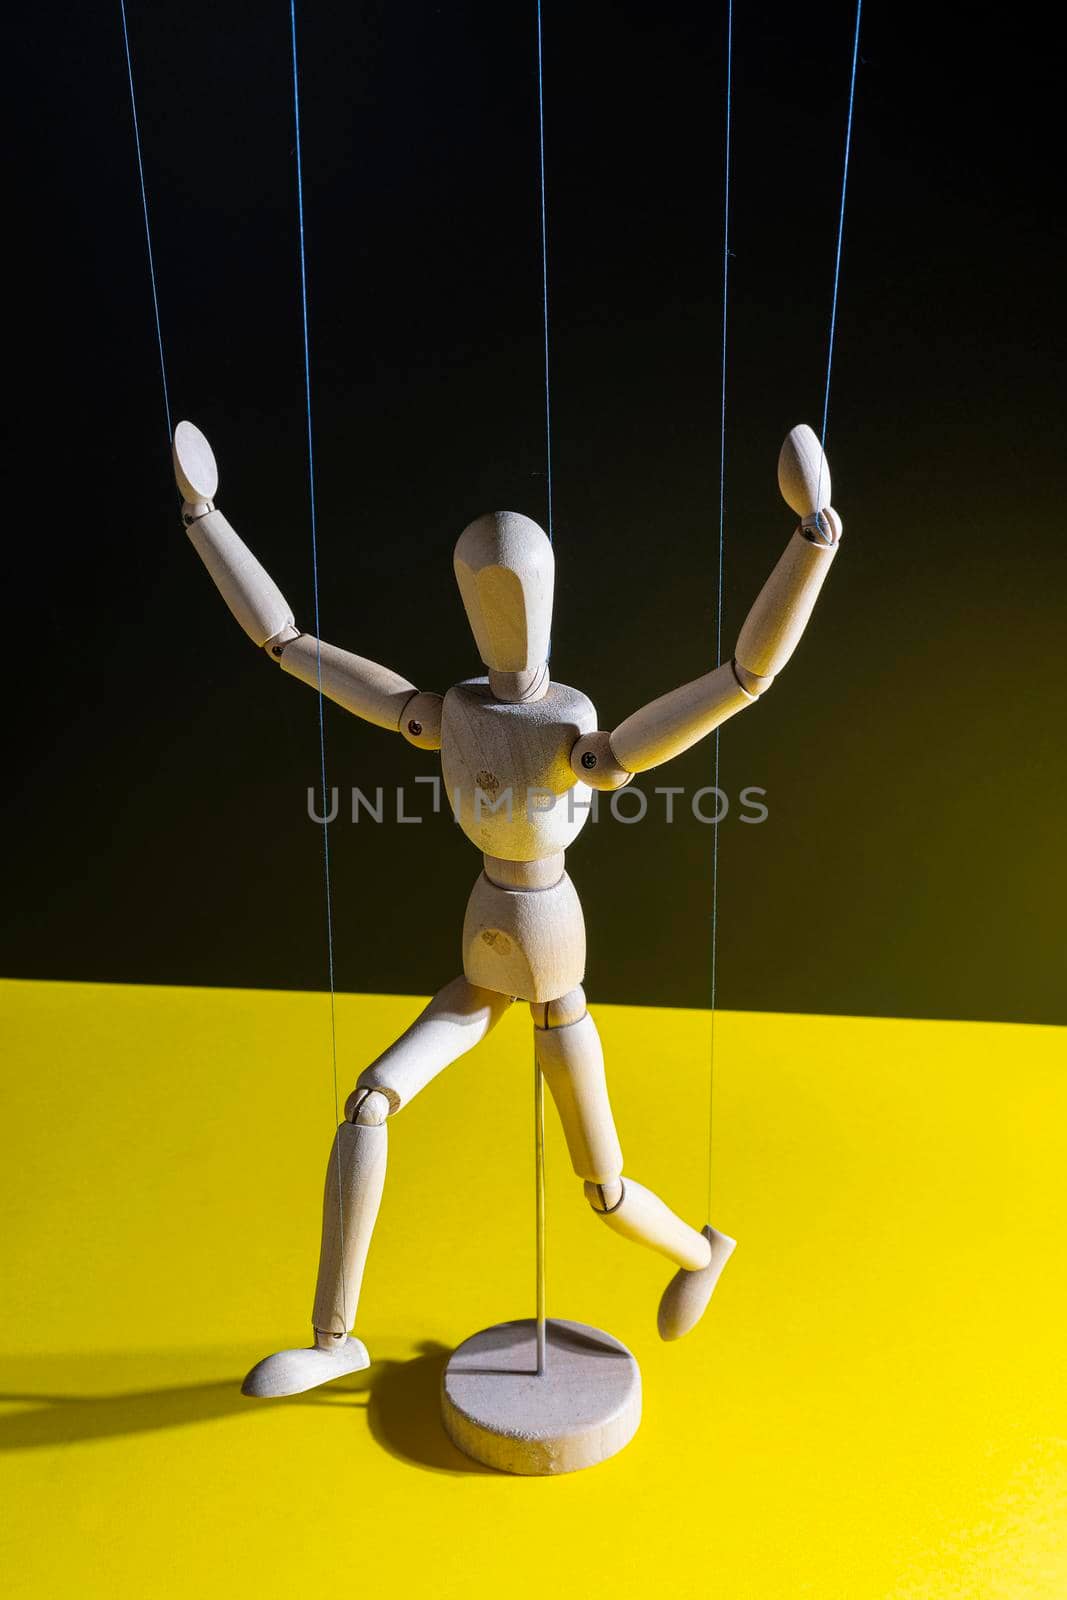 a wooden mannequin controlled with wires